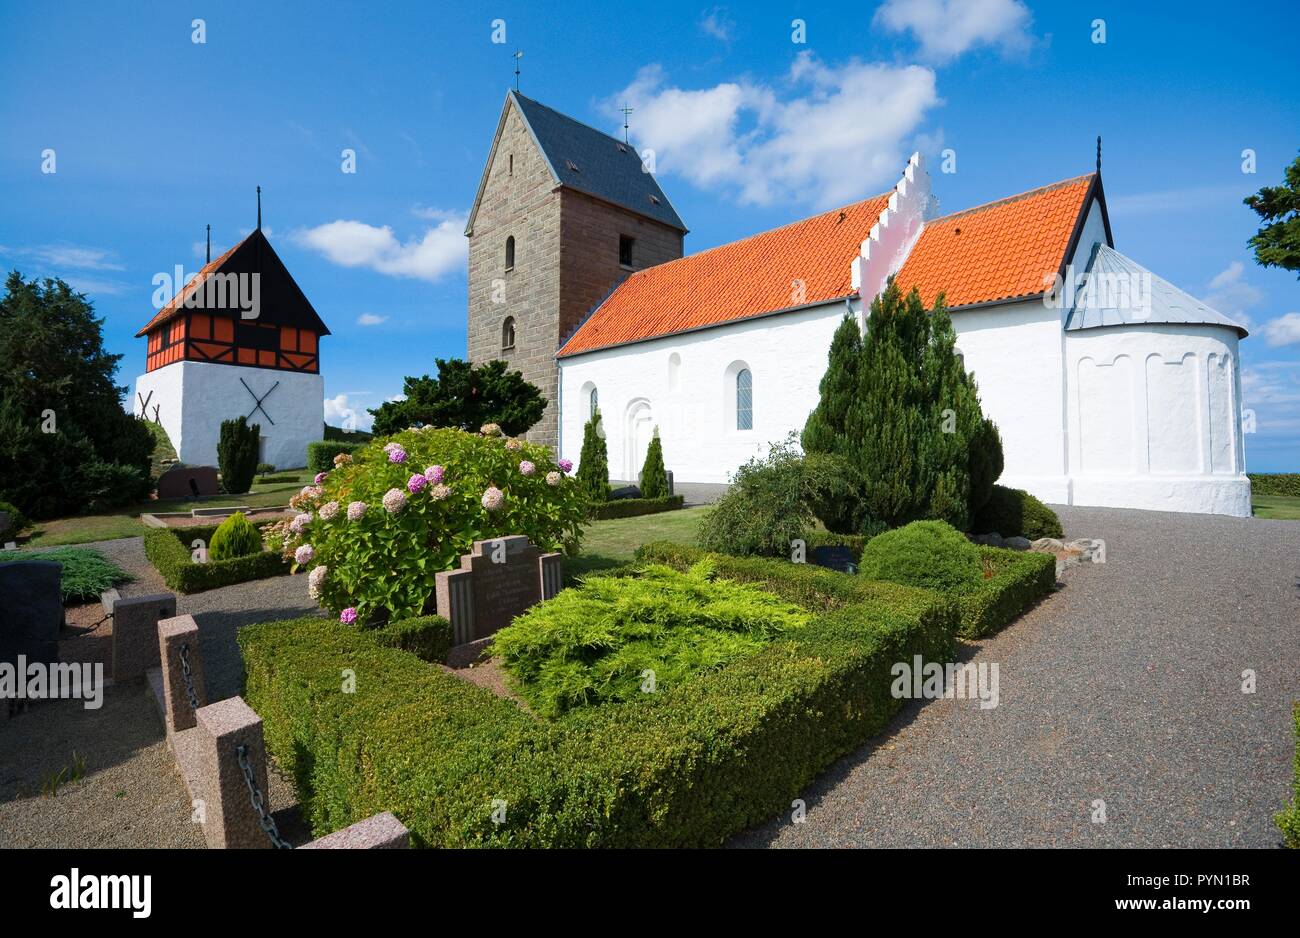 RUTSKER, DENMARK - AUGUST 25, 2018: View of the Church of Ruth from the graveyard. Built about 1200, is the highest point for a church anywhere in Den Stock Photo